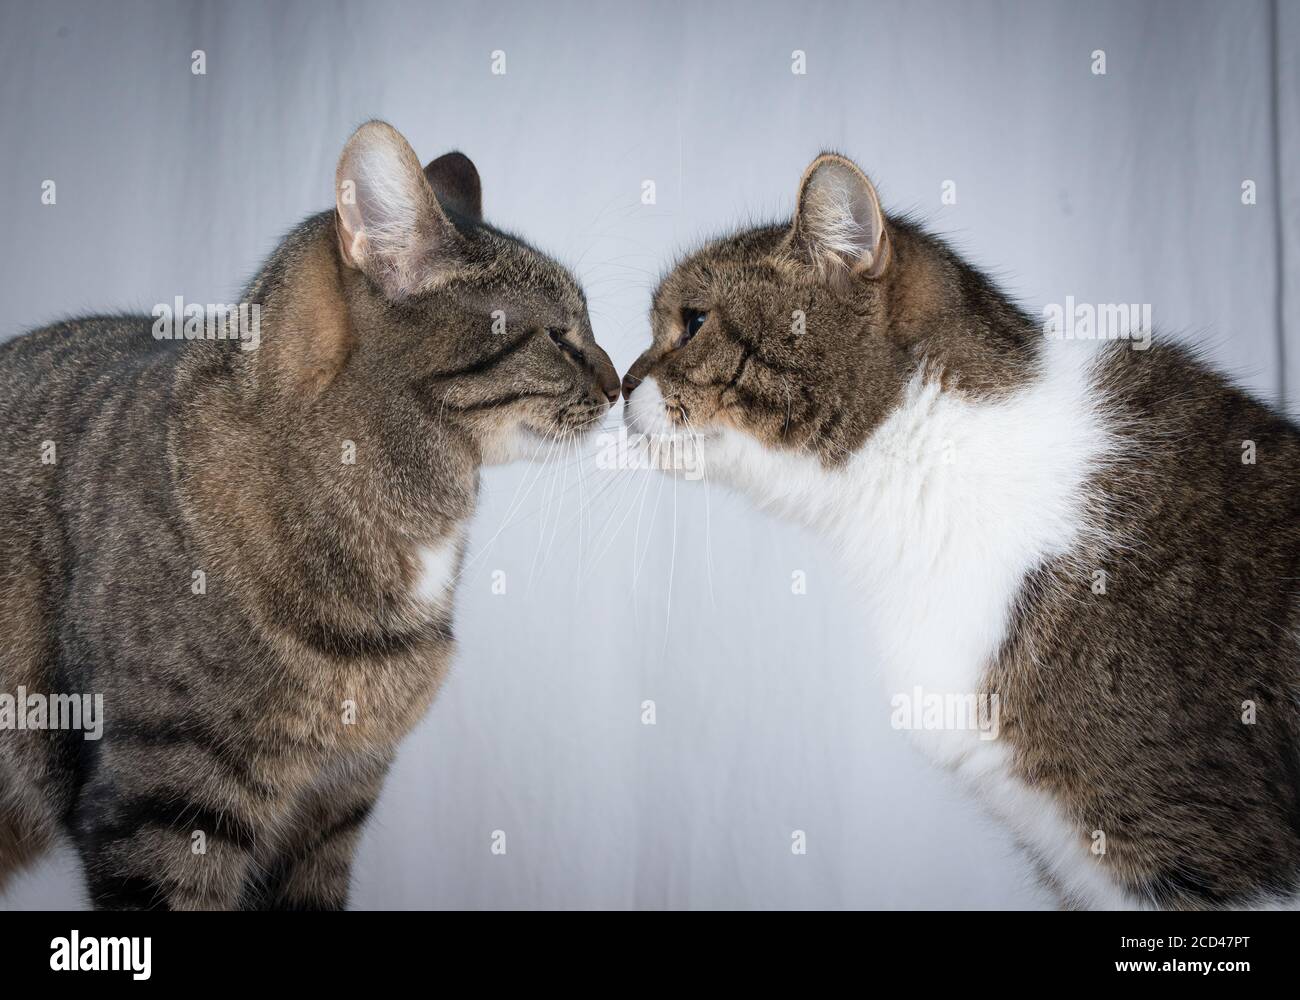 tabby british shorthair cat kissing tabby domestic cat in front of white curtain Stock Photo